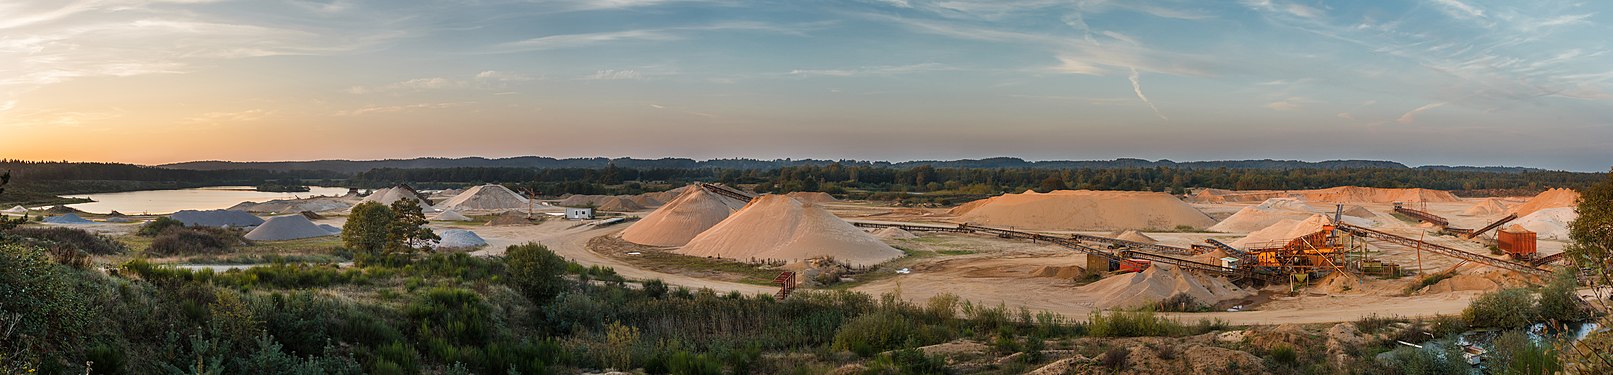 Panorama of a gravel pit near Ans, Denmark